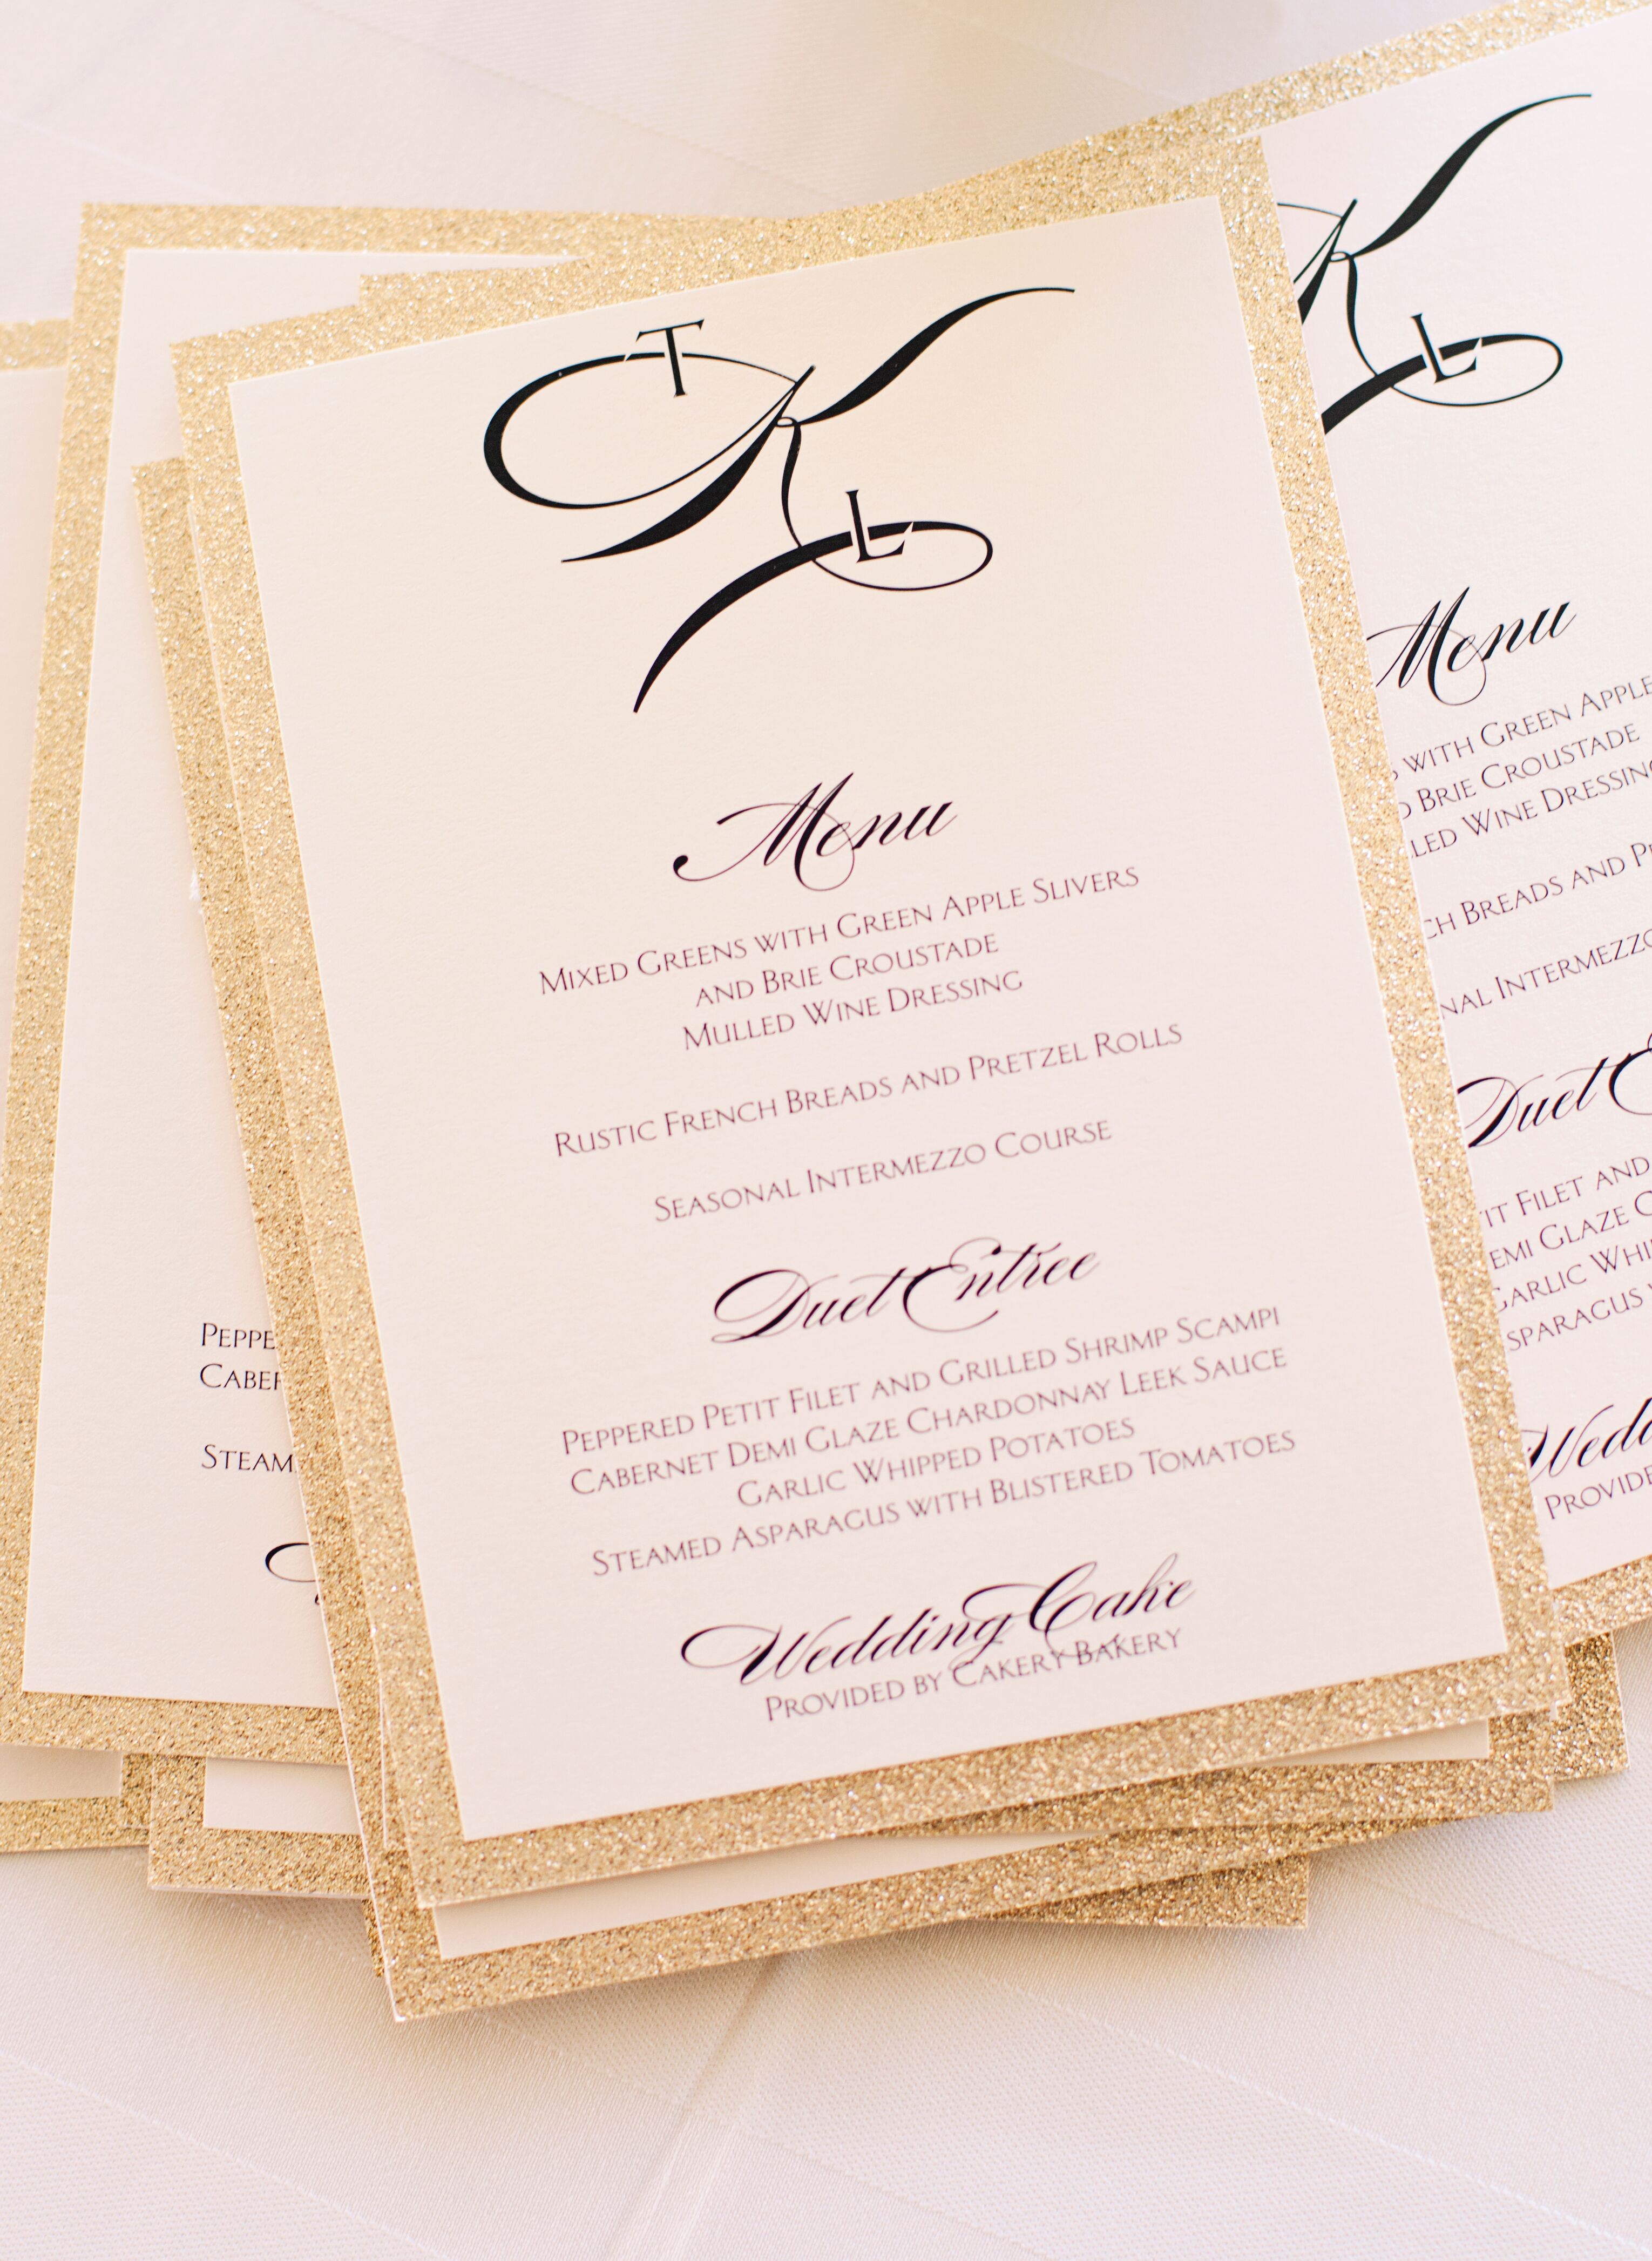 Black White and Gold Menu Cards